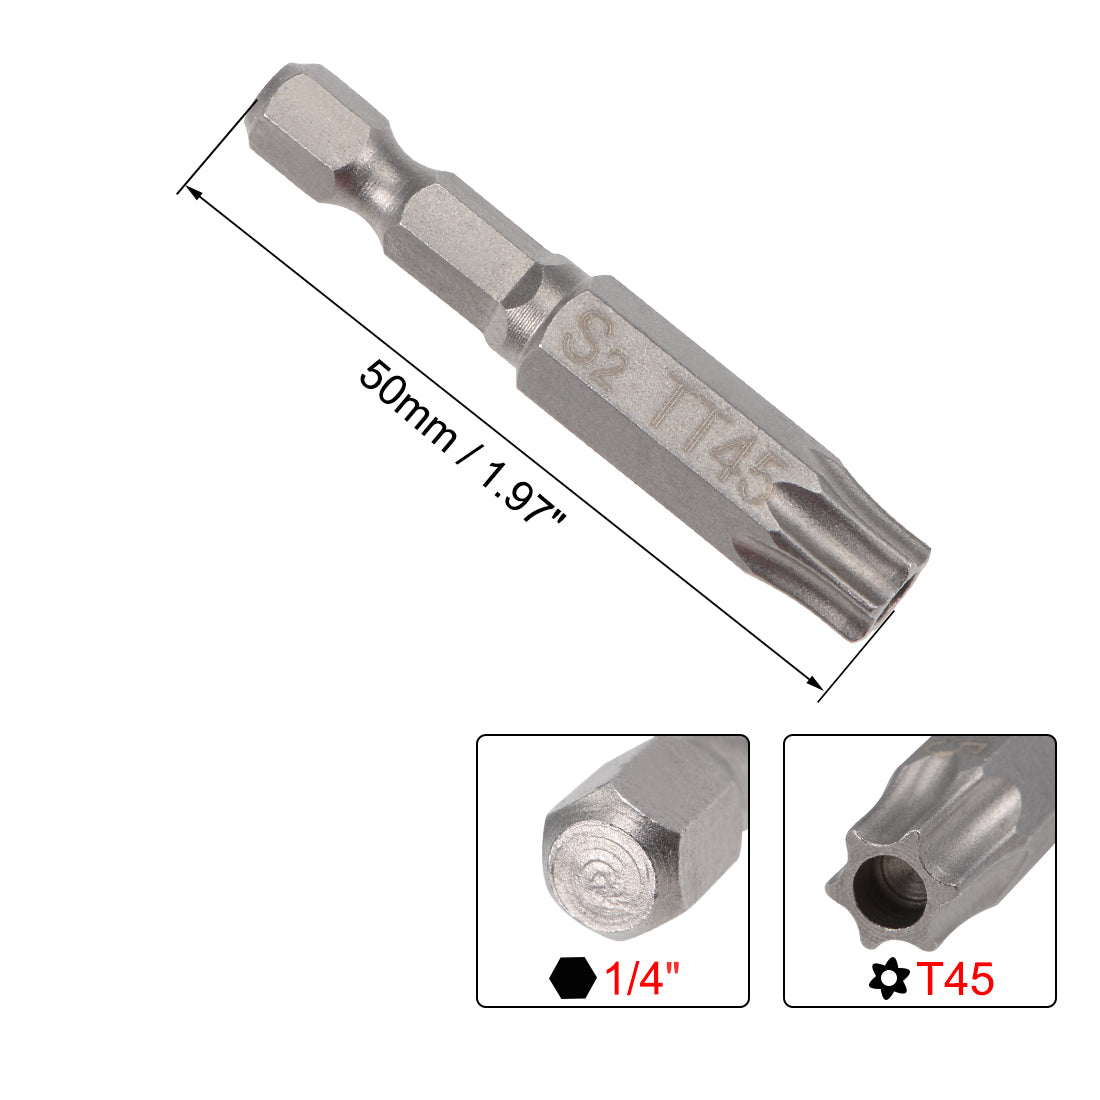 uxcell Uxcell 2 Pcs T45 Torx Head Screwdriver Bits, Magnetic 2 Inch Long Security Tamper Proof Star 6 Point Screw Driver Drill Bit with 1/4 Inch Hex Shank